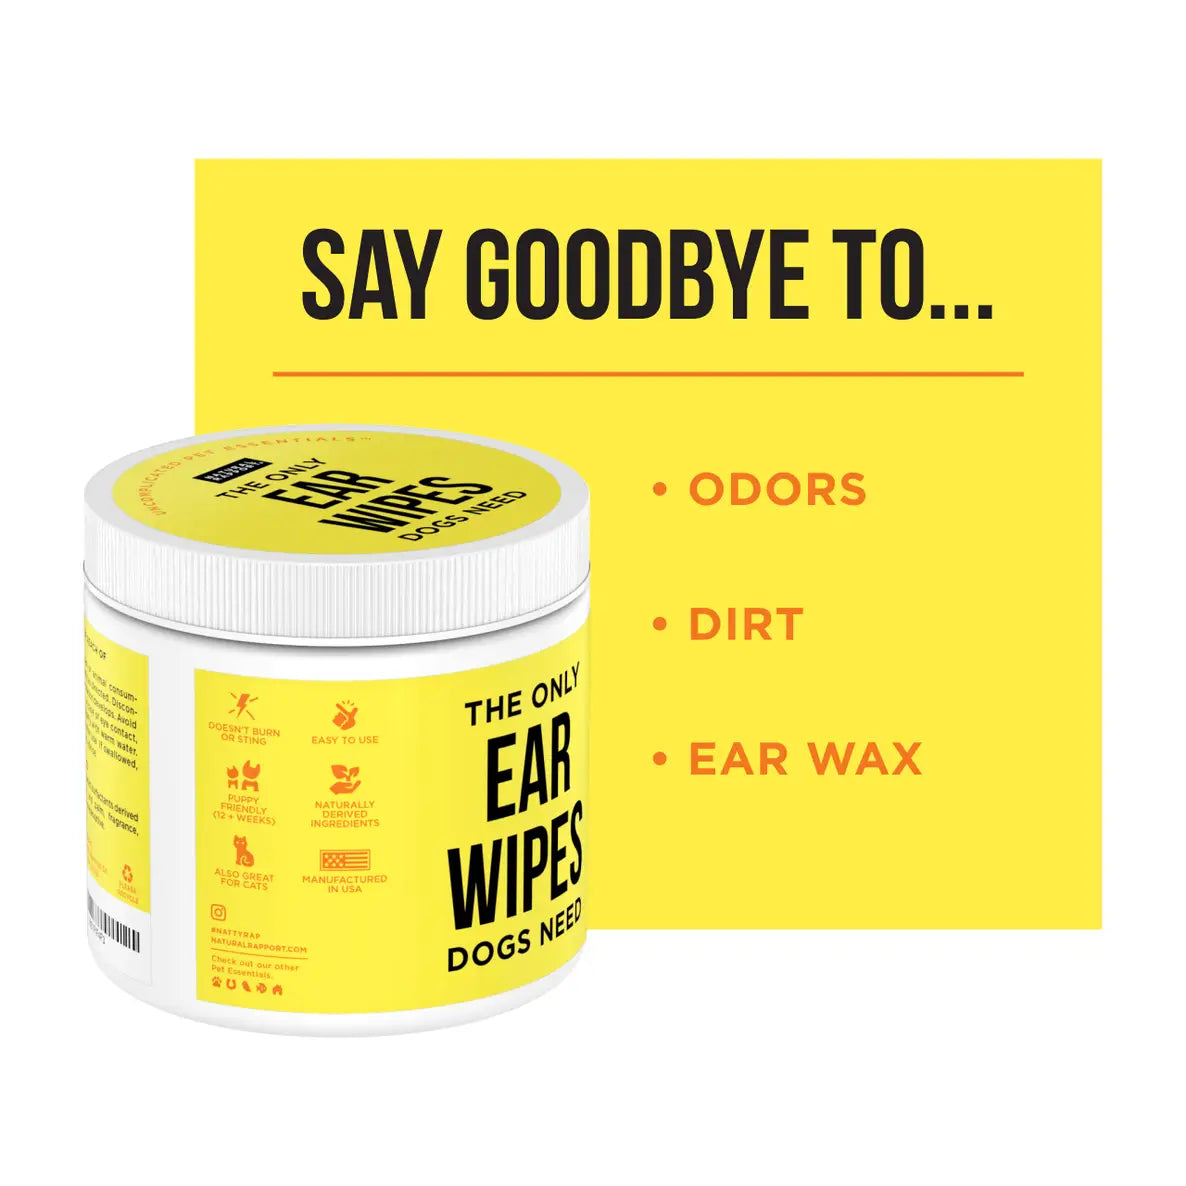 Natural Rapport The Only Ear Wipes Dogs Need